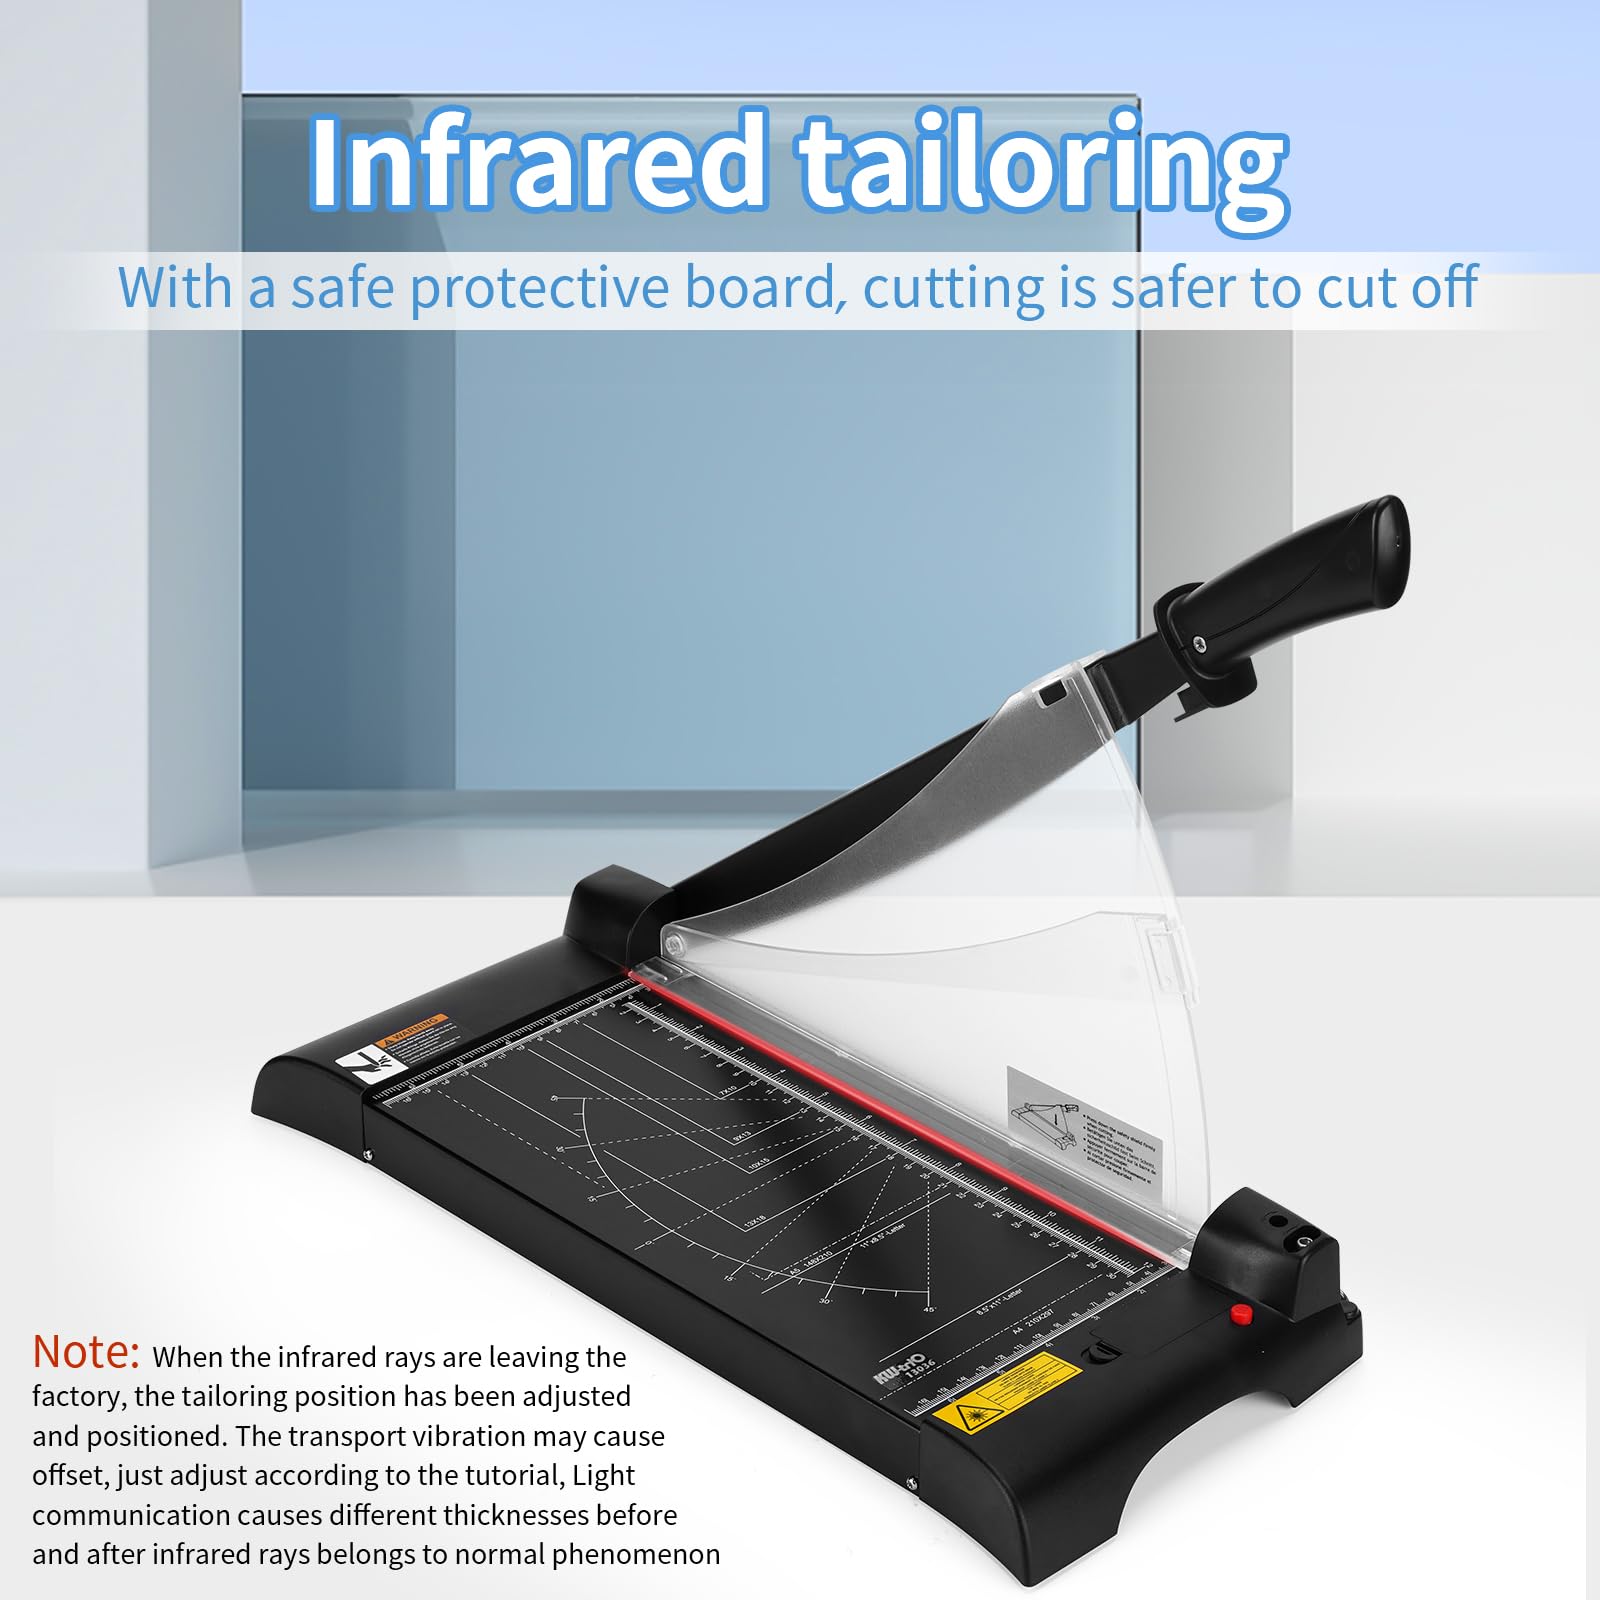 Paper Cutter,Laser Positioning Paper Cutter,Paper Cutter Guillotine with Safety Blade Lock 12” 10 Sheet Capacity, Paper Trimmer with Metal Base Paper Cutting Board for Home, Office,School